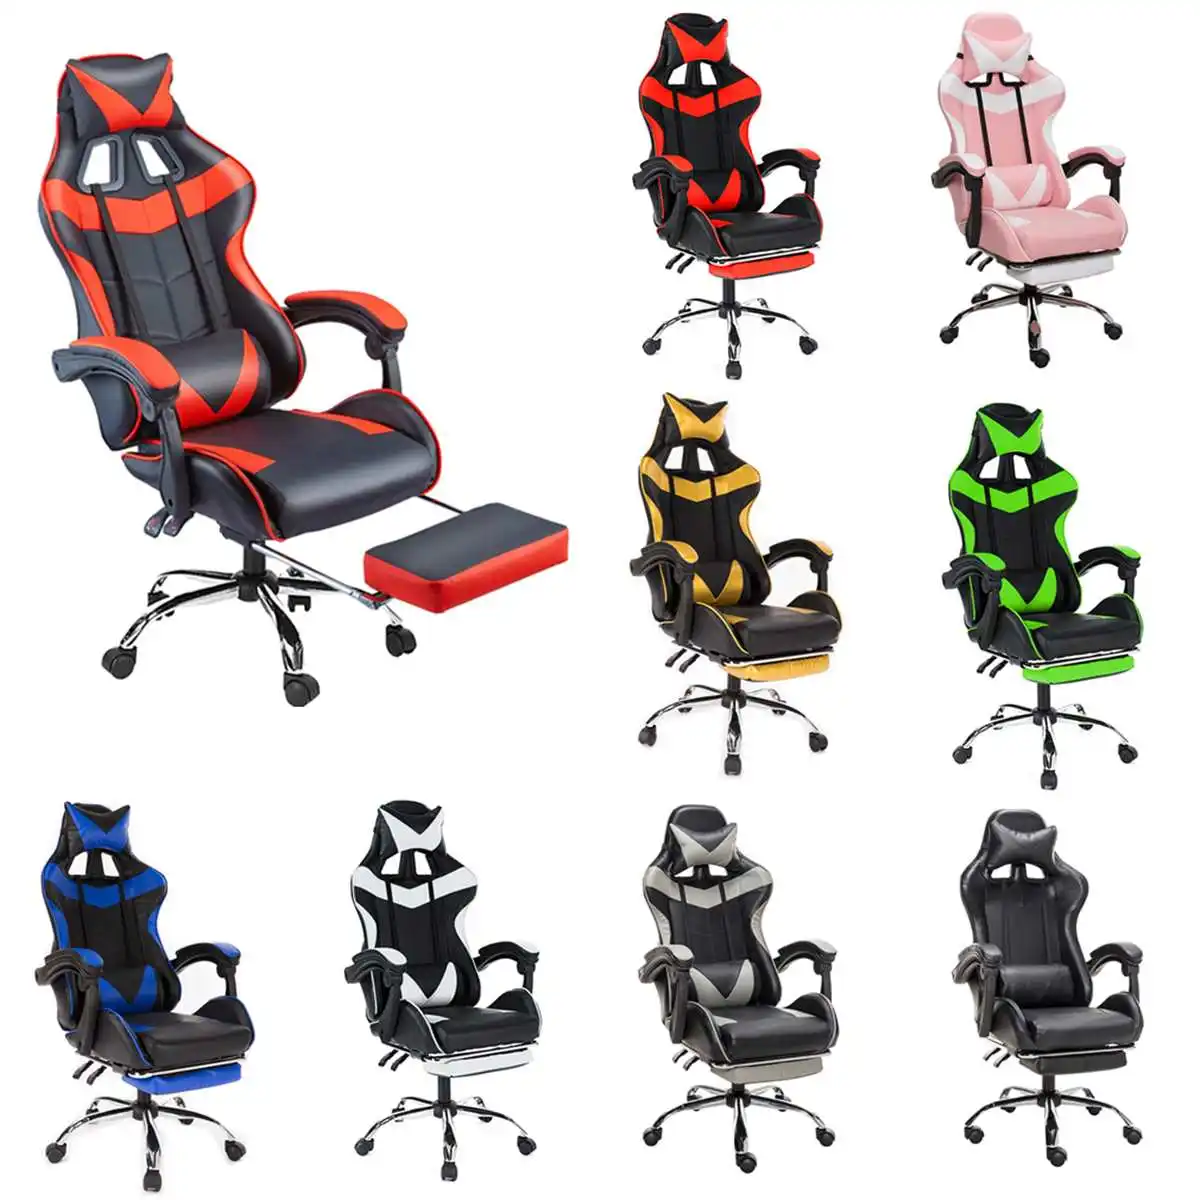 Lumbar Support Wcg Gaming Chair Pu Leather Swiveling With Re